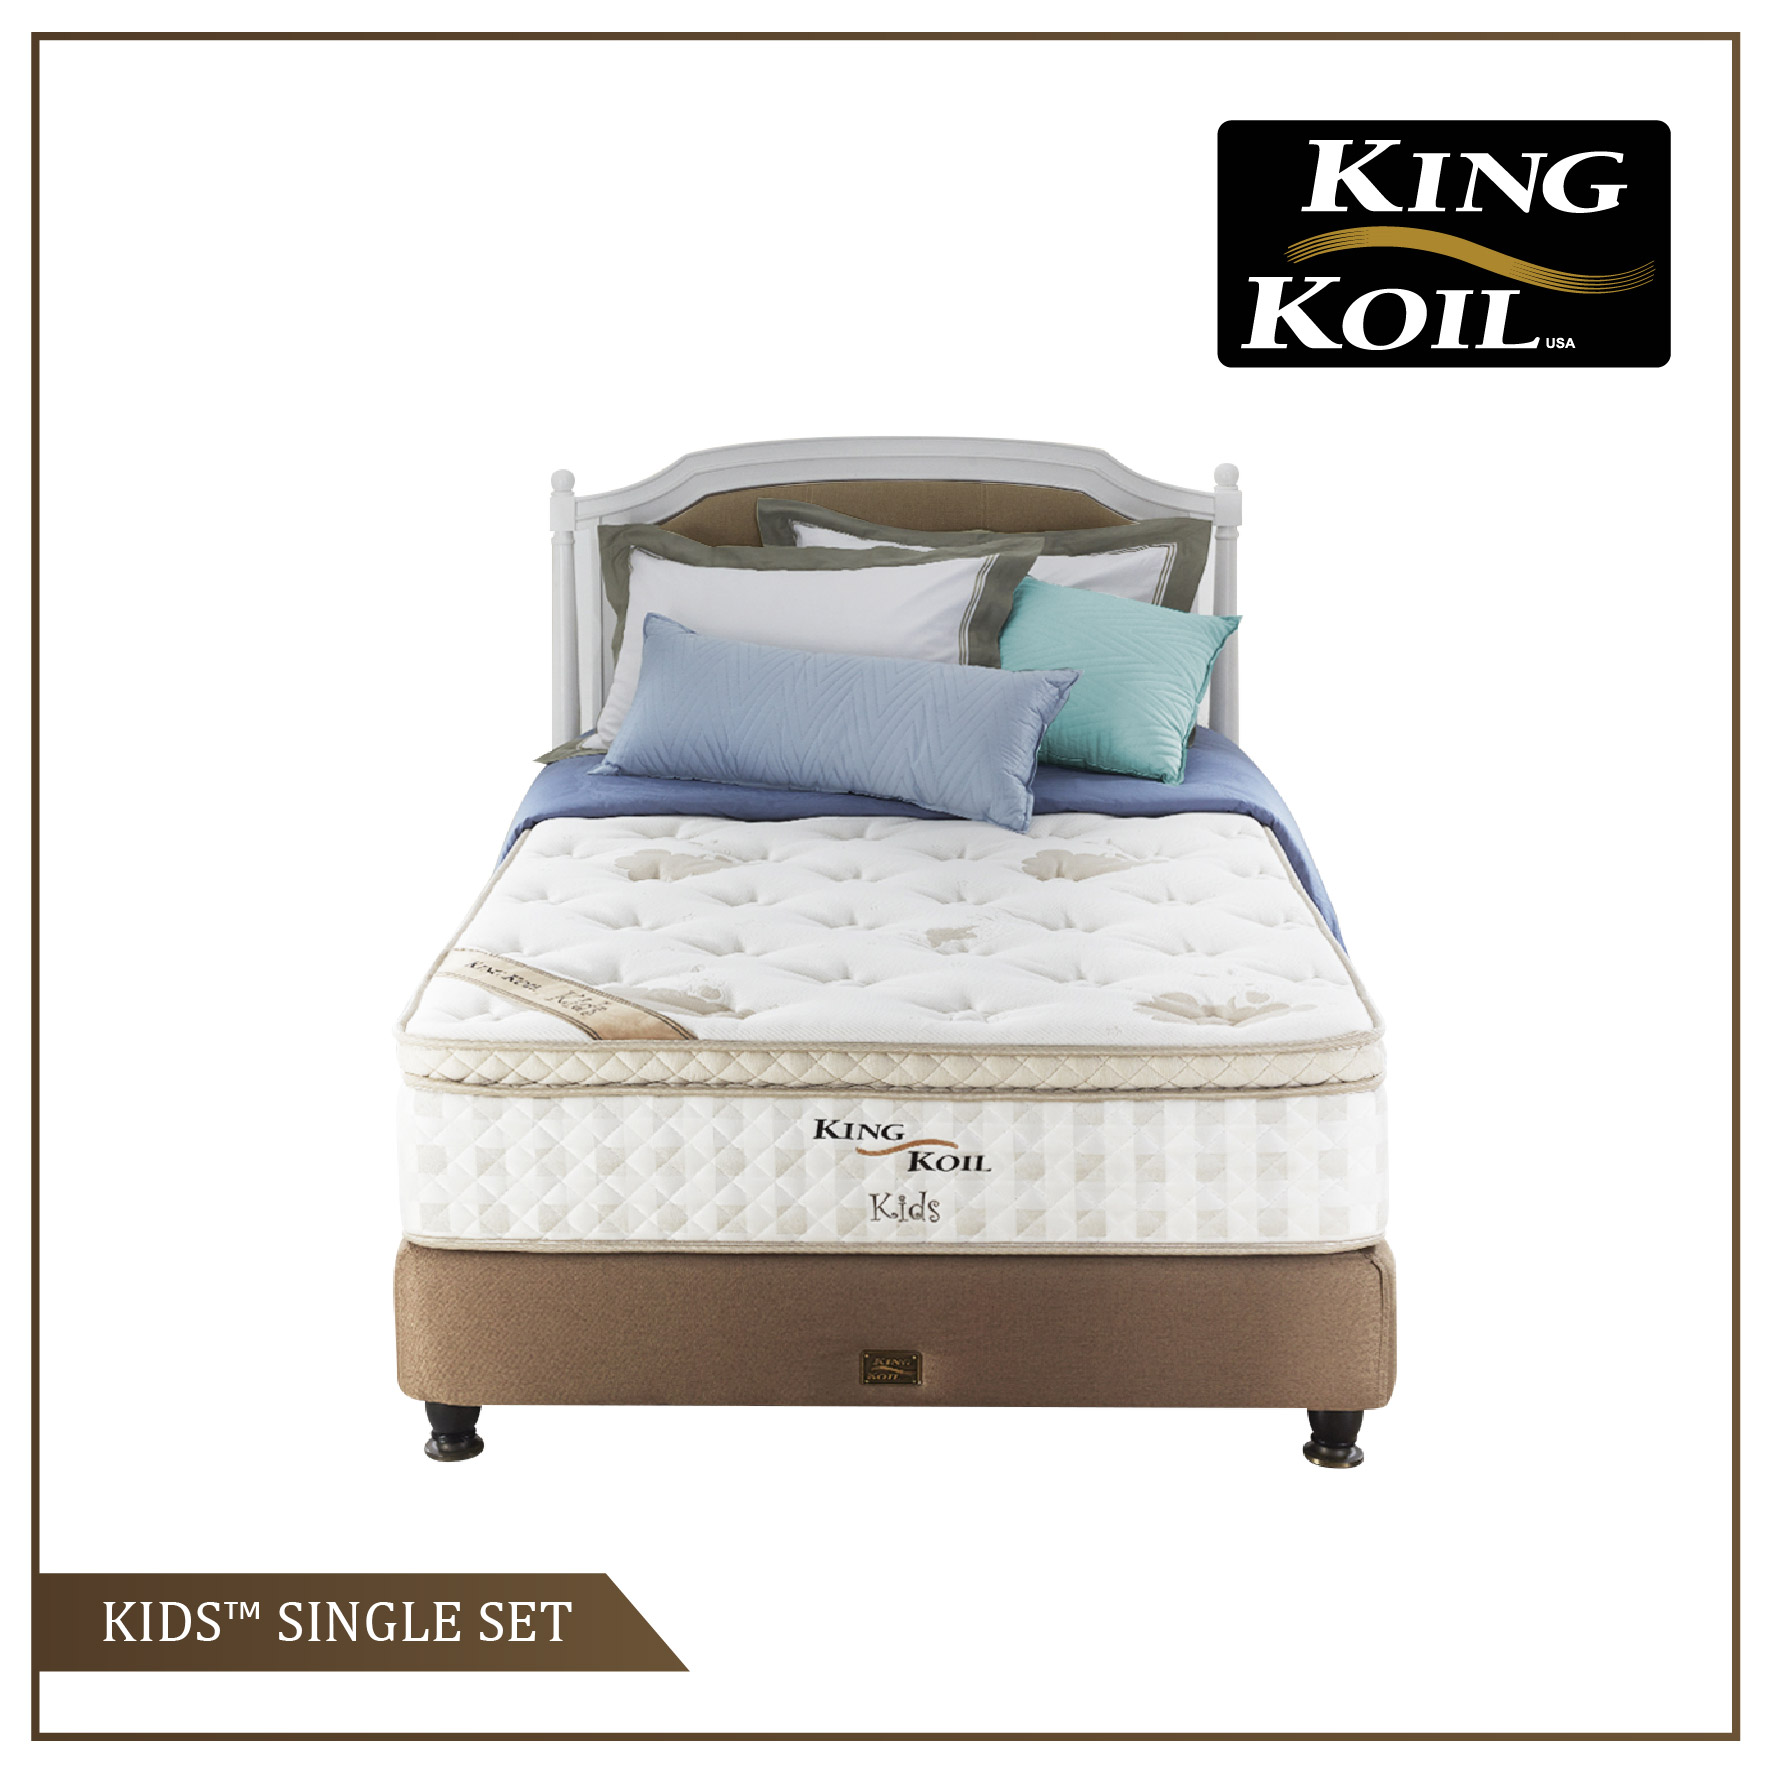 King Koil Spring Bed Kids Single Matrass Only